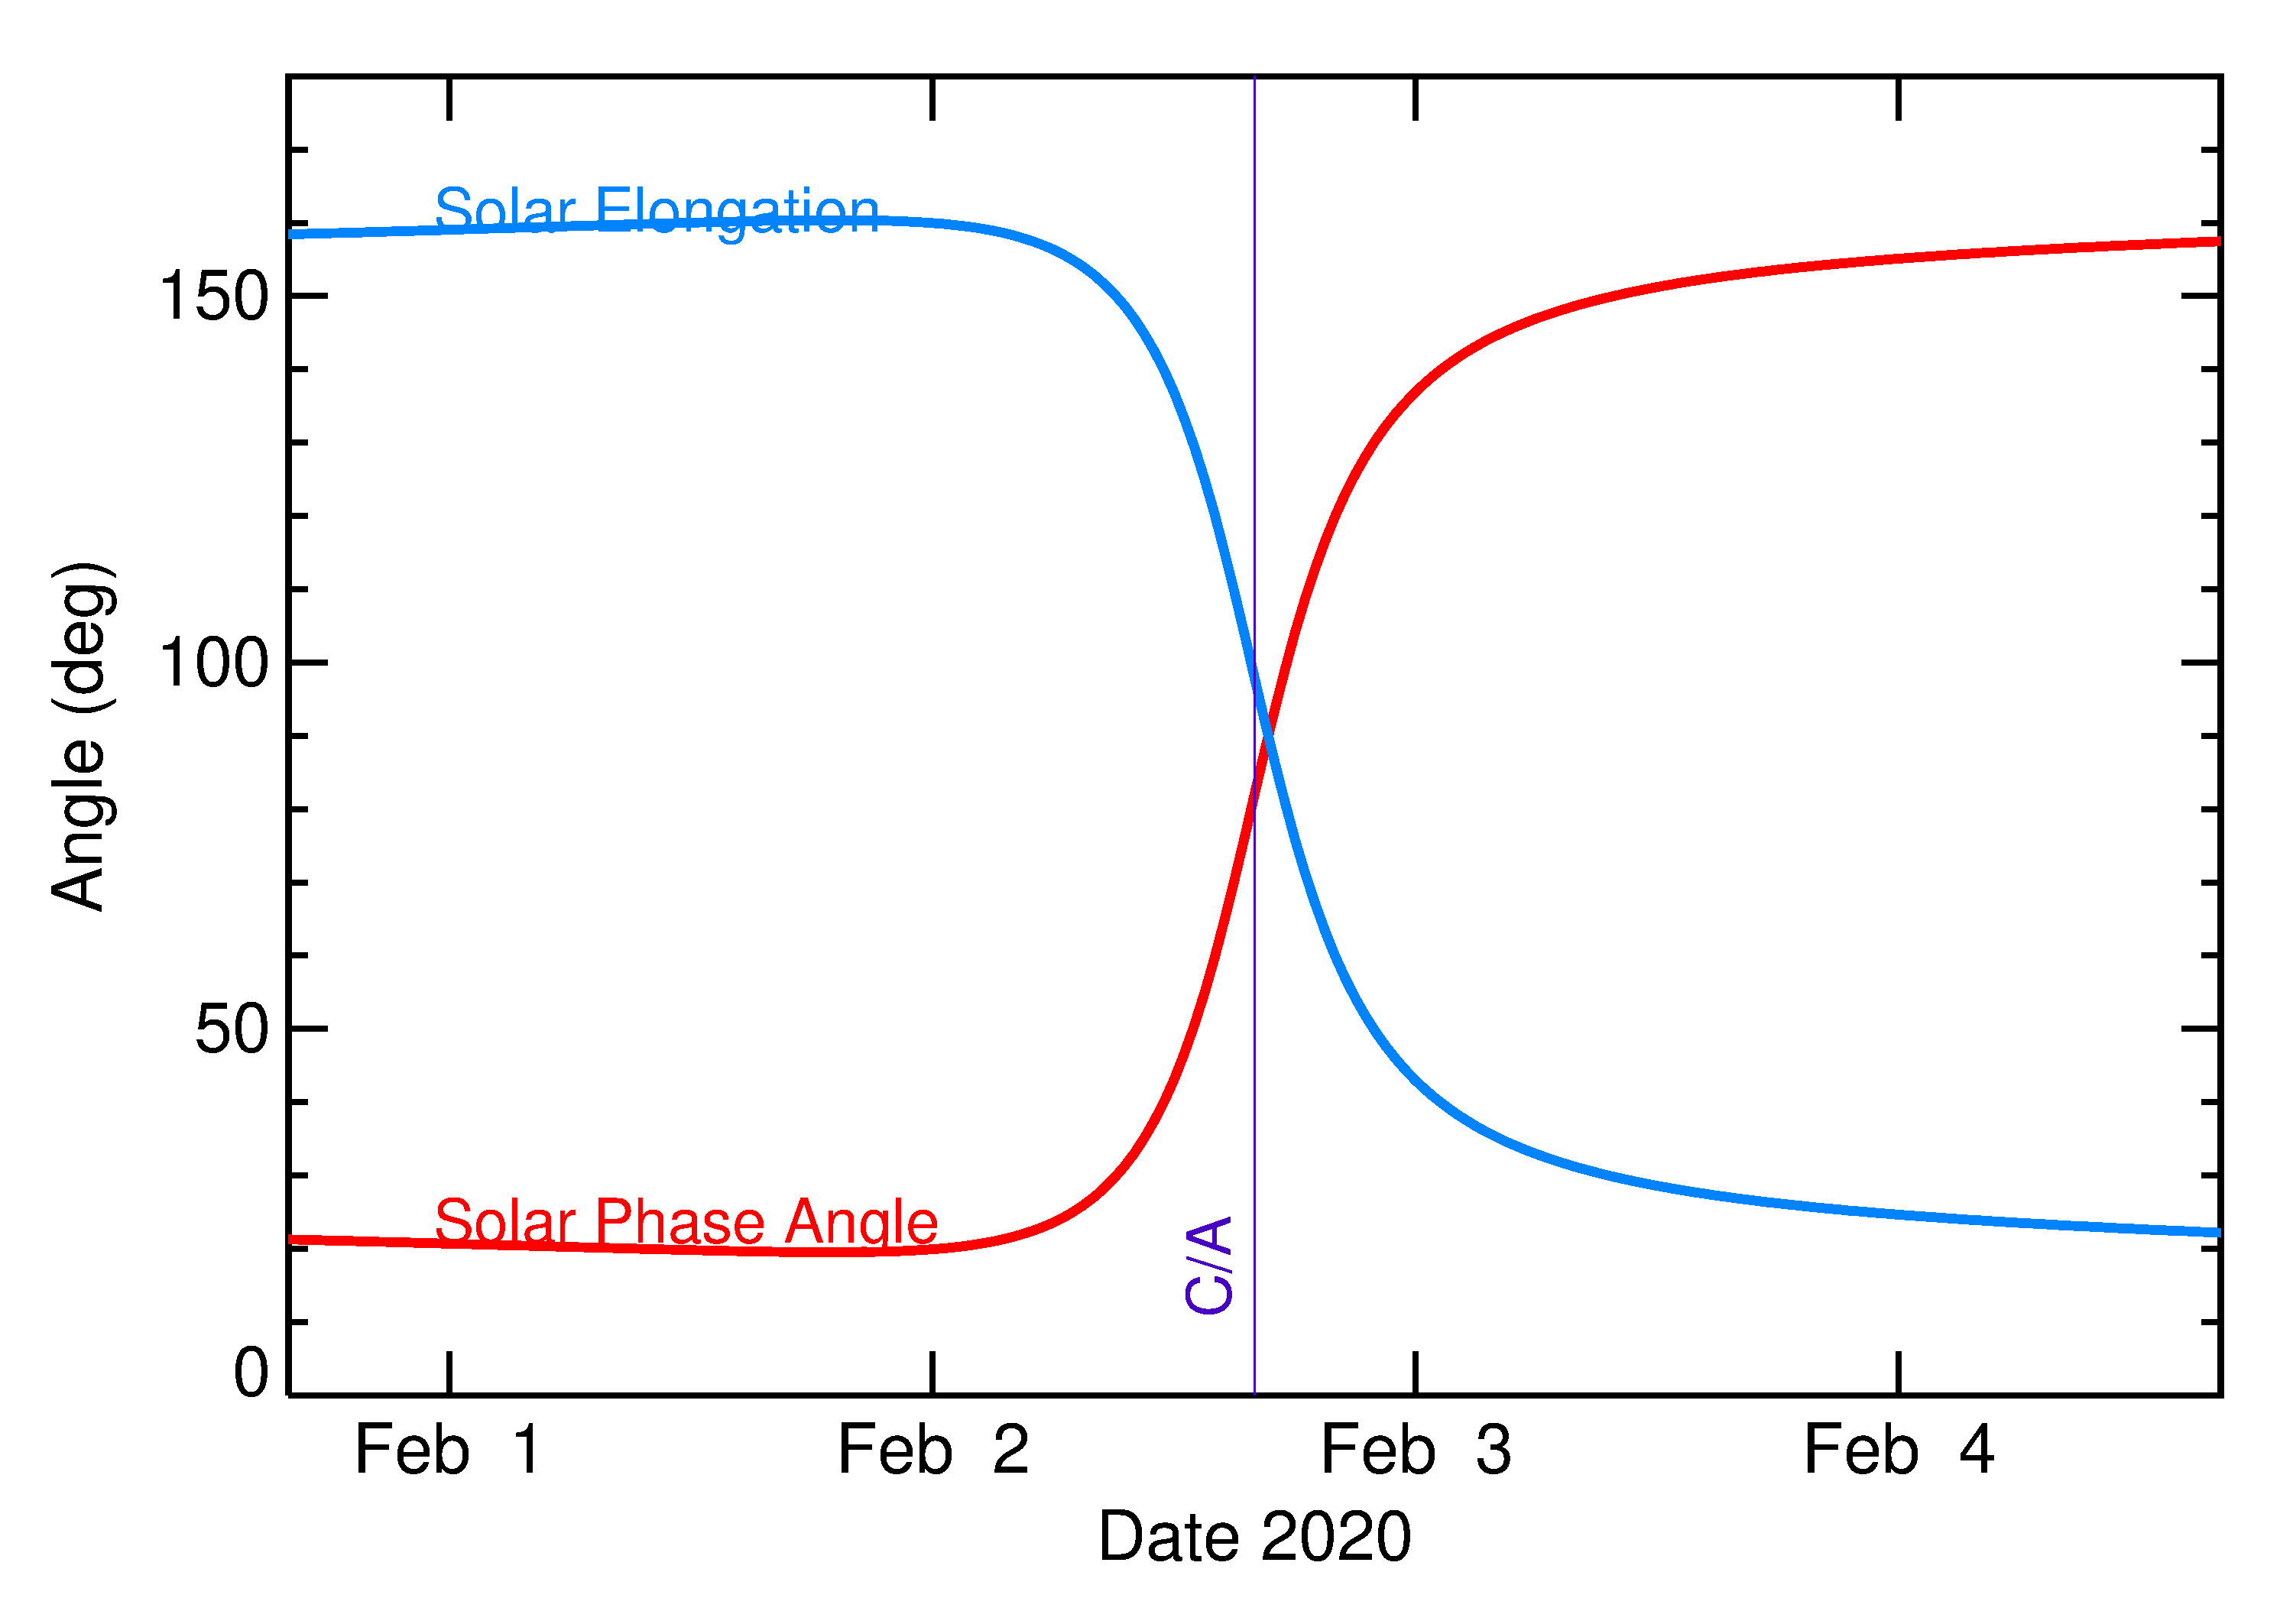 Solar Elongation and Solar Phase Angle of 2020 CA in the days around closest approach